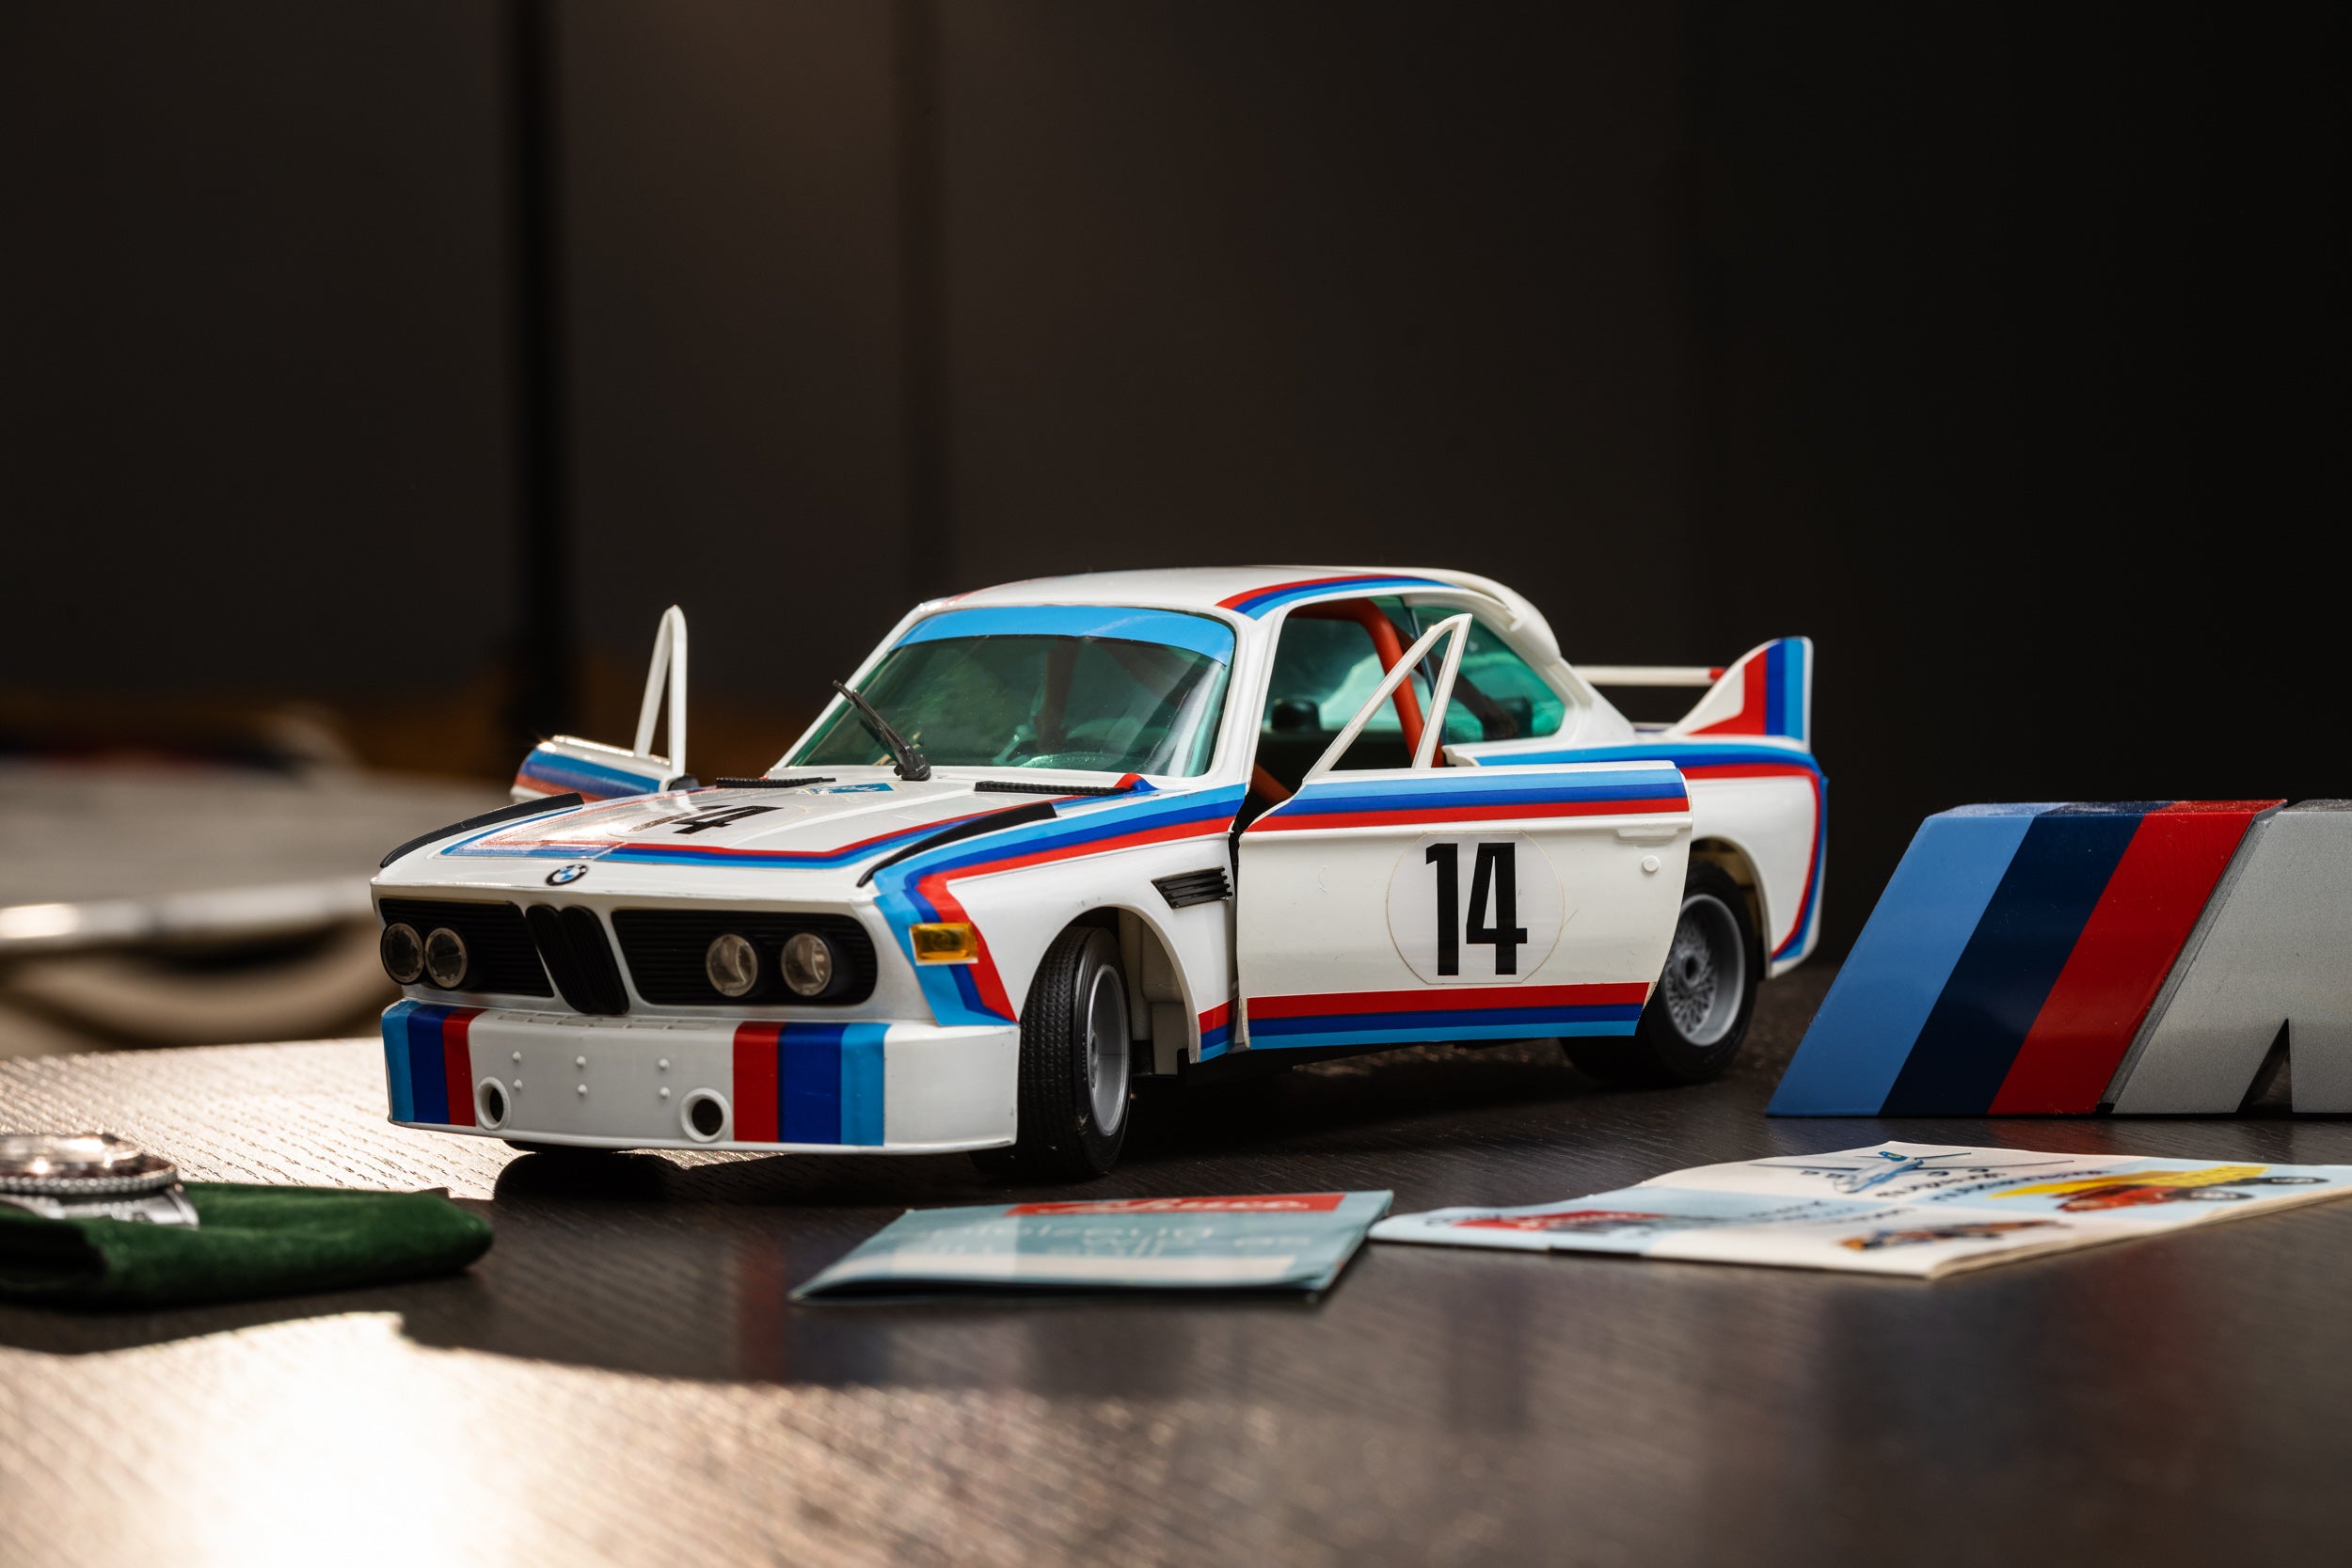 BMW 3.0CSL Toy from Schuco – Analog:Shift